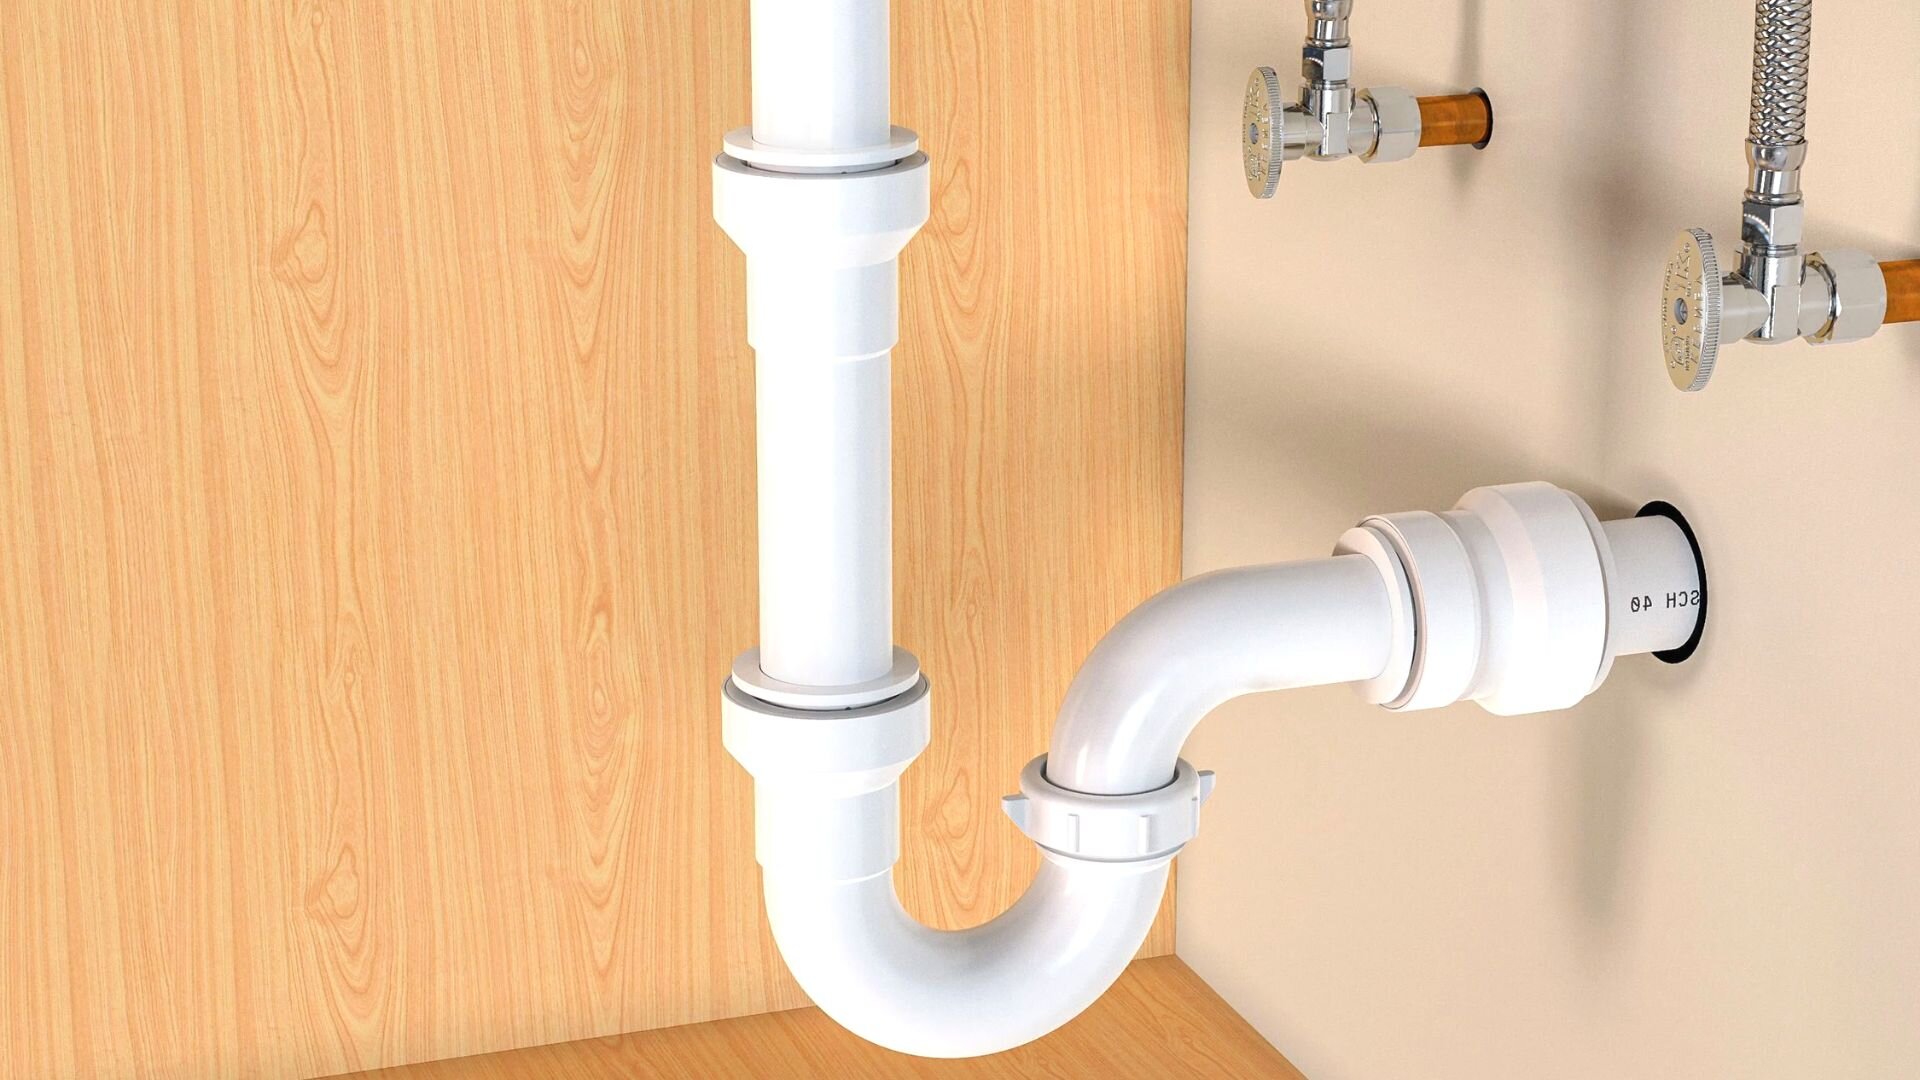 QUICK TIP FOR A KITCHEN SINK DRAIN THAT IS LEAKING! 